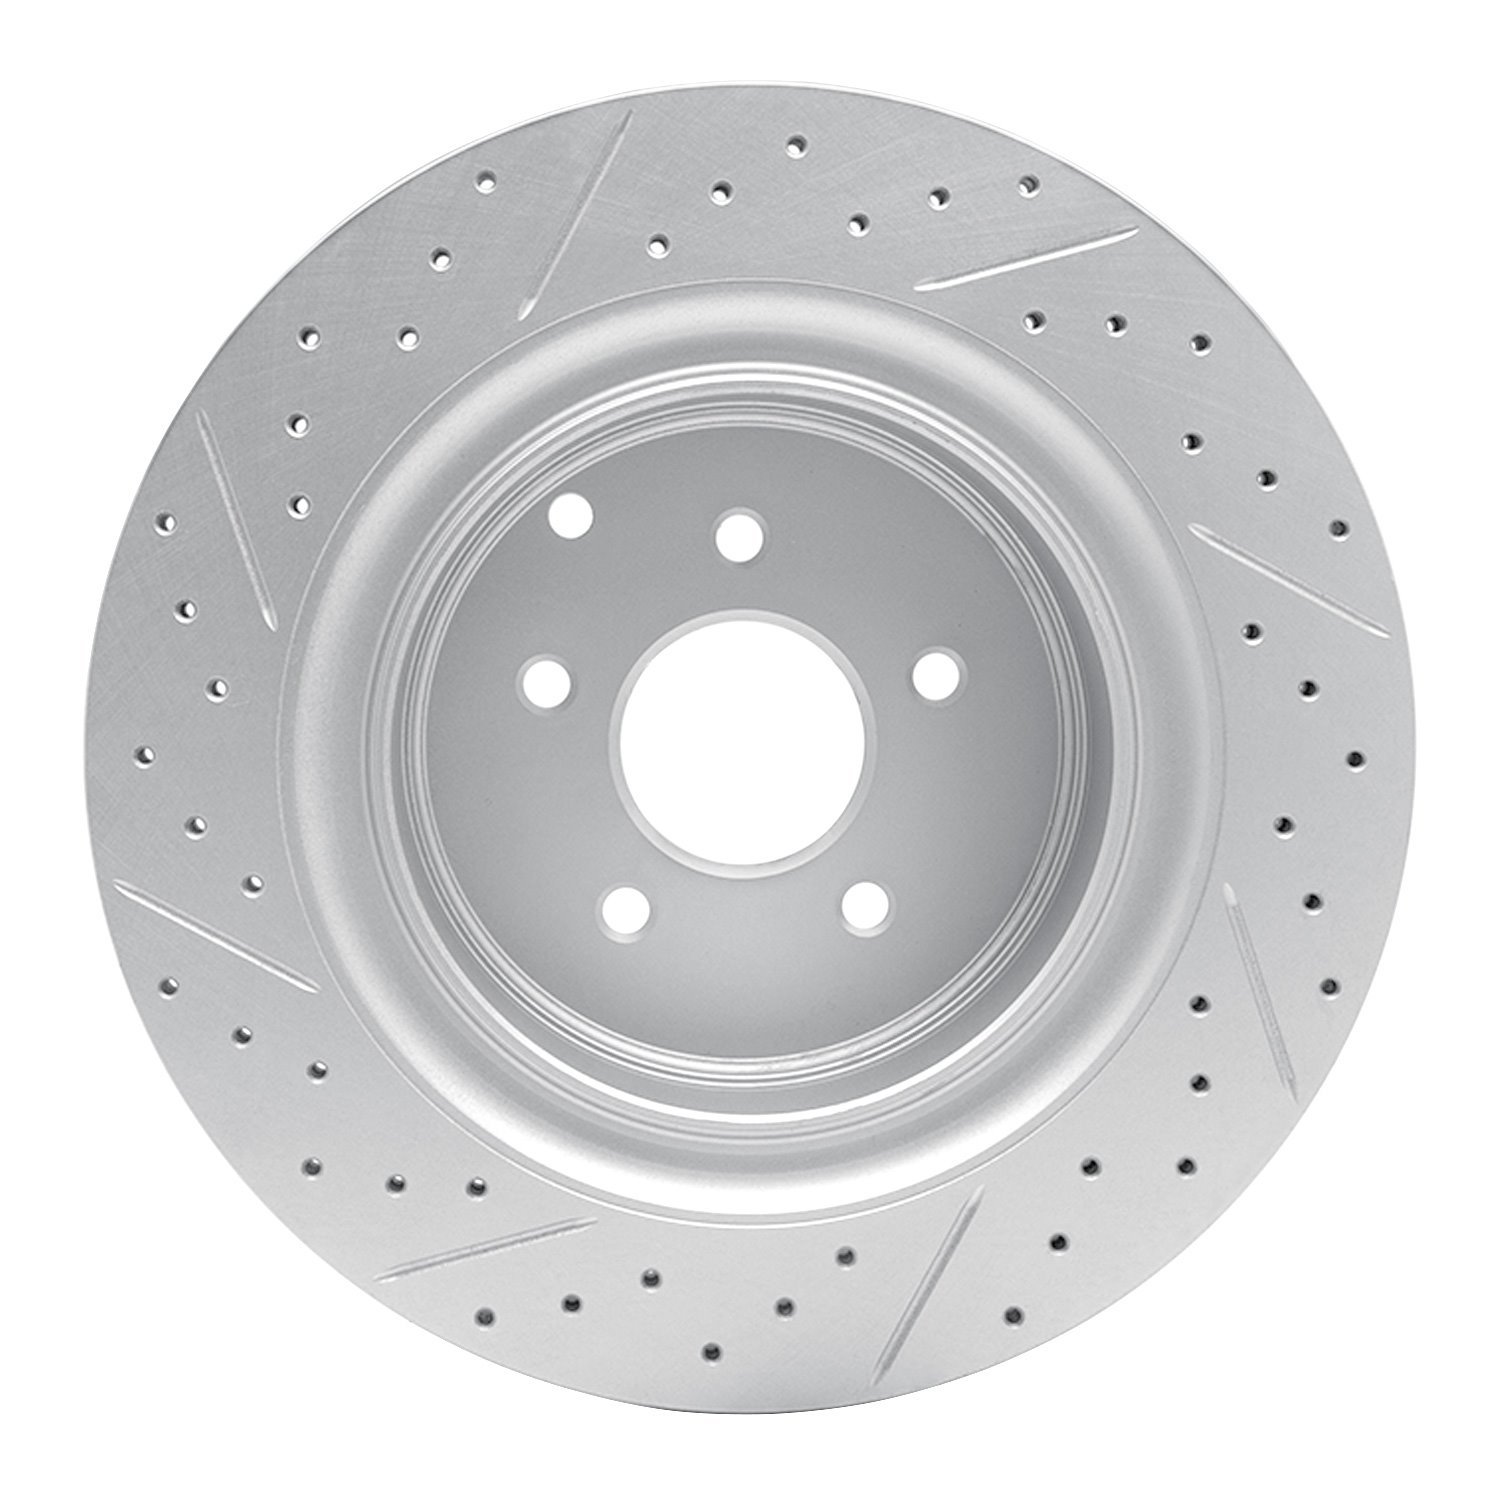 830-68015R Geoperformance Drilled/Slotted Brake Rotor, Fits Select Infiniti/Nissan, Position: Rear Right